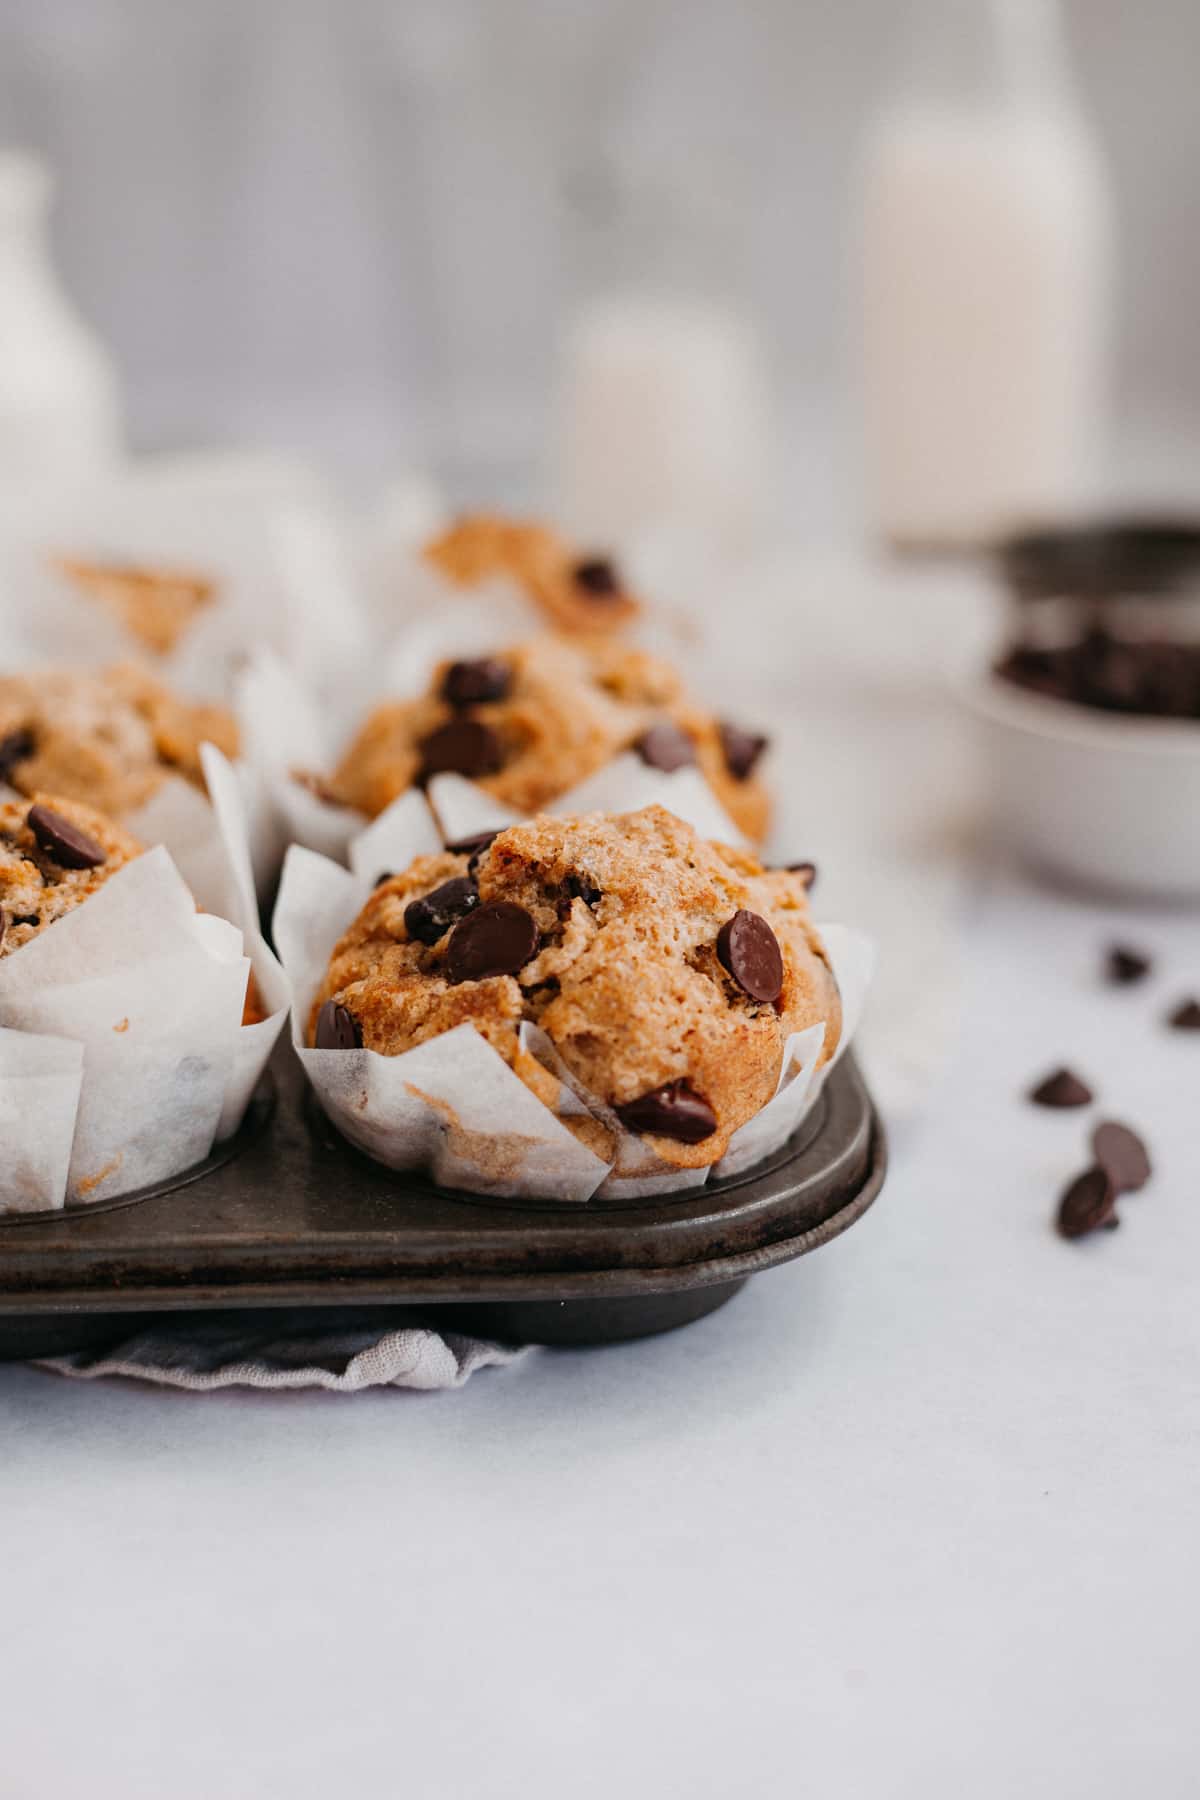 banana oatmeal muffins with chocolate chips in a dark muffin pan